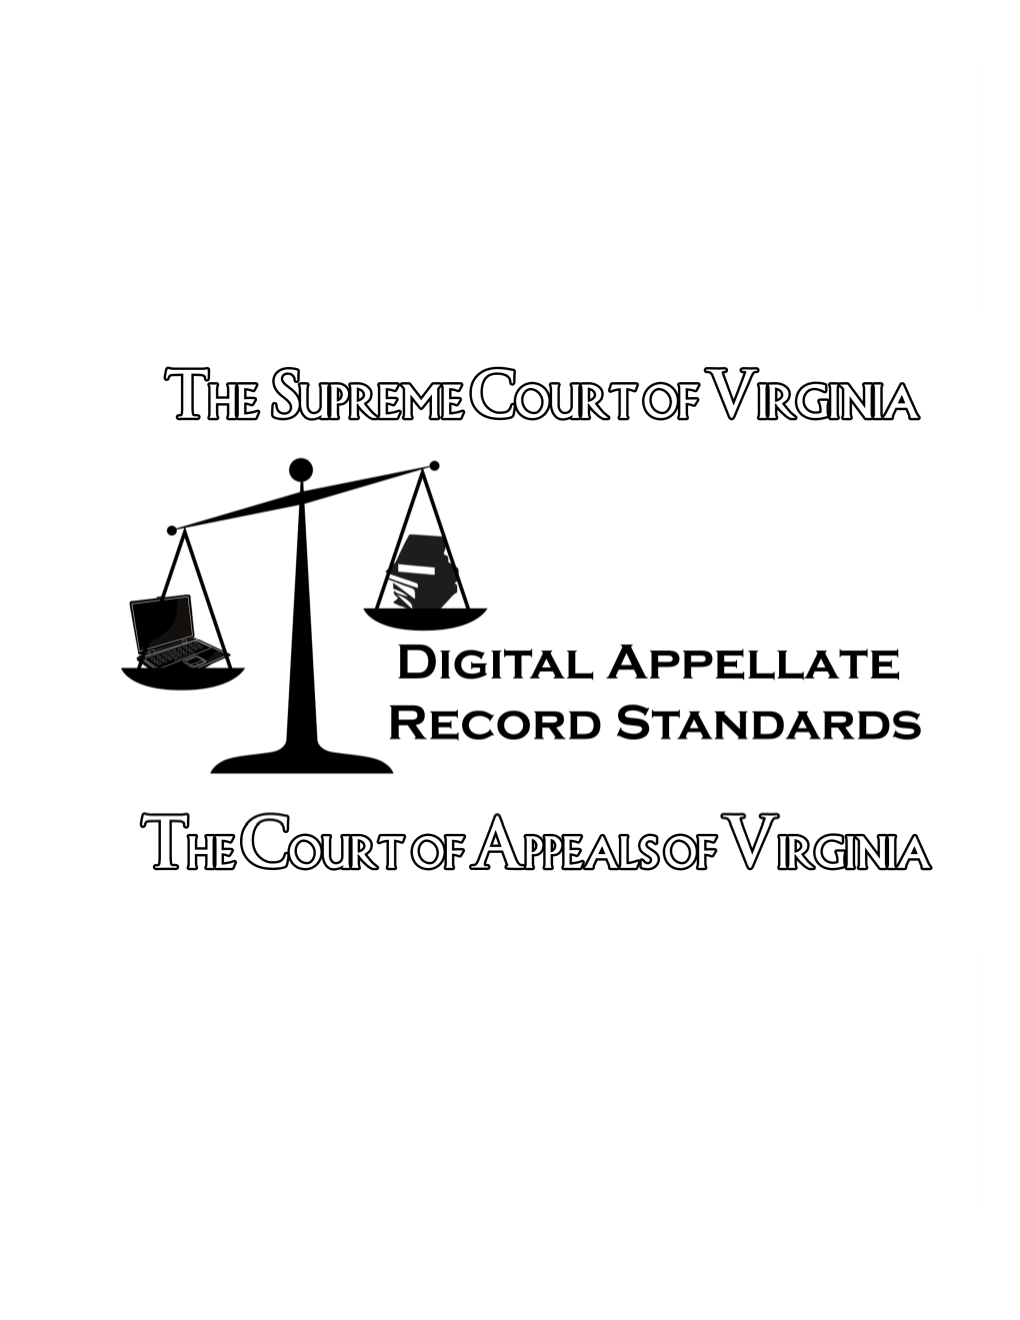 Digital Appellate Record Standards for the Supreme Court of Virginia and Court of Appeals of Virginia